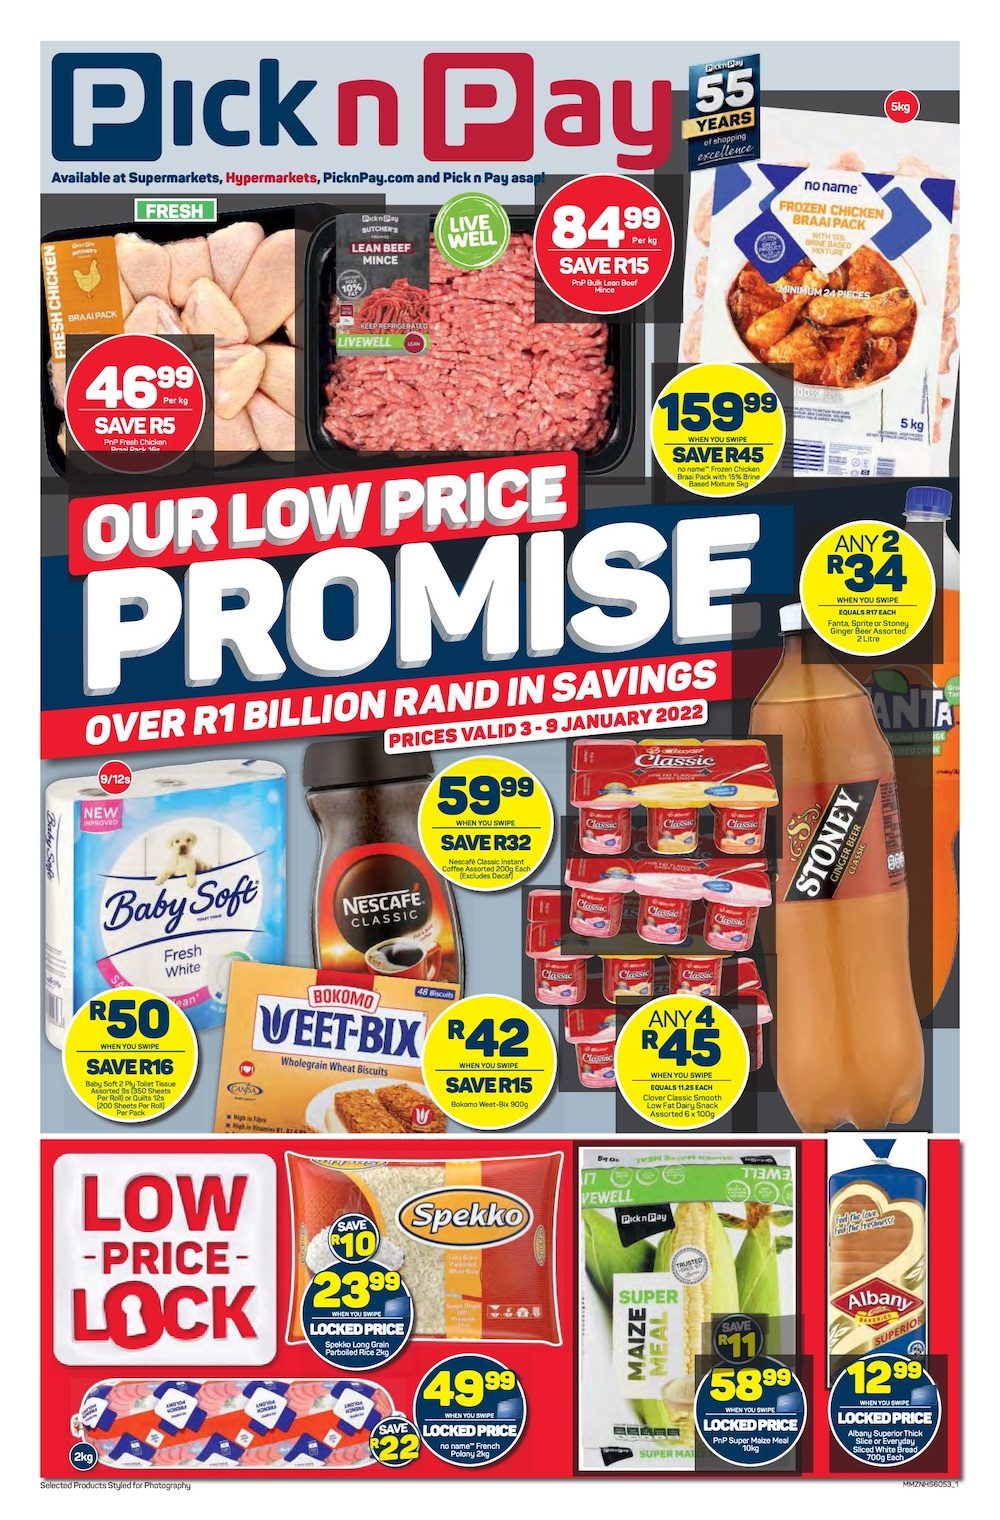 Pick n Pay Specials 3 – 9 Jan 2022